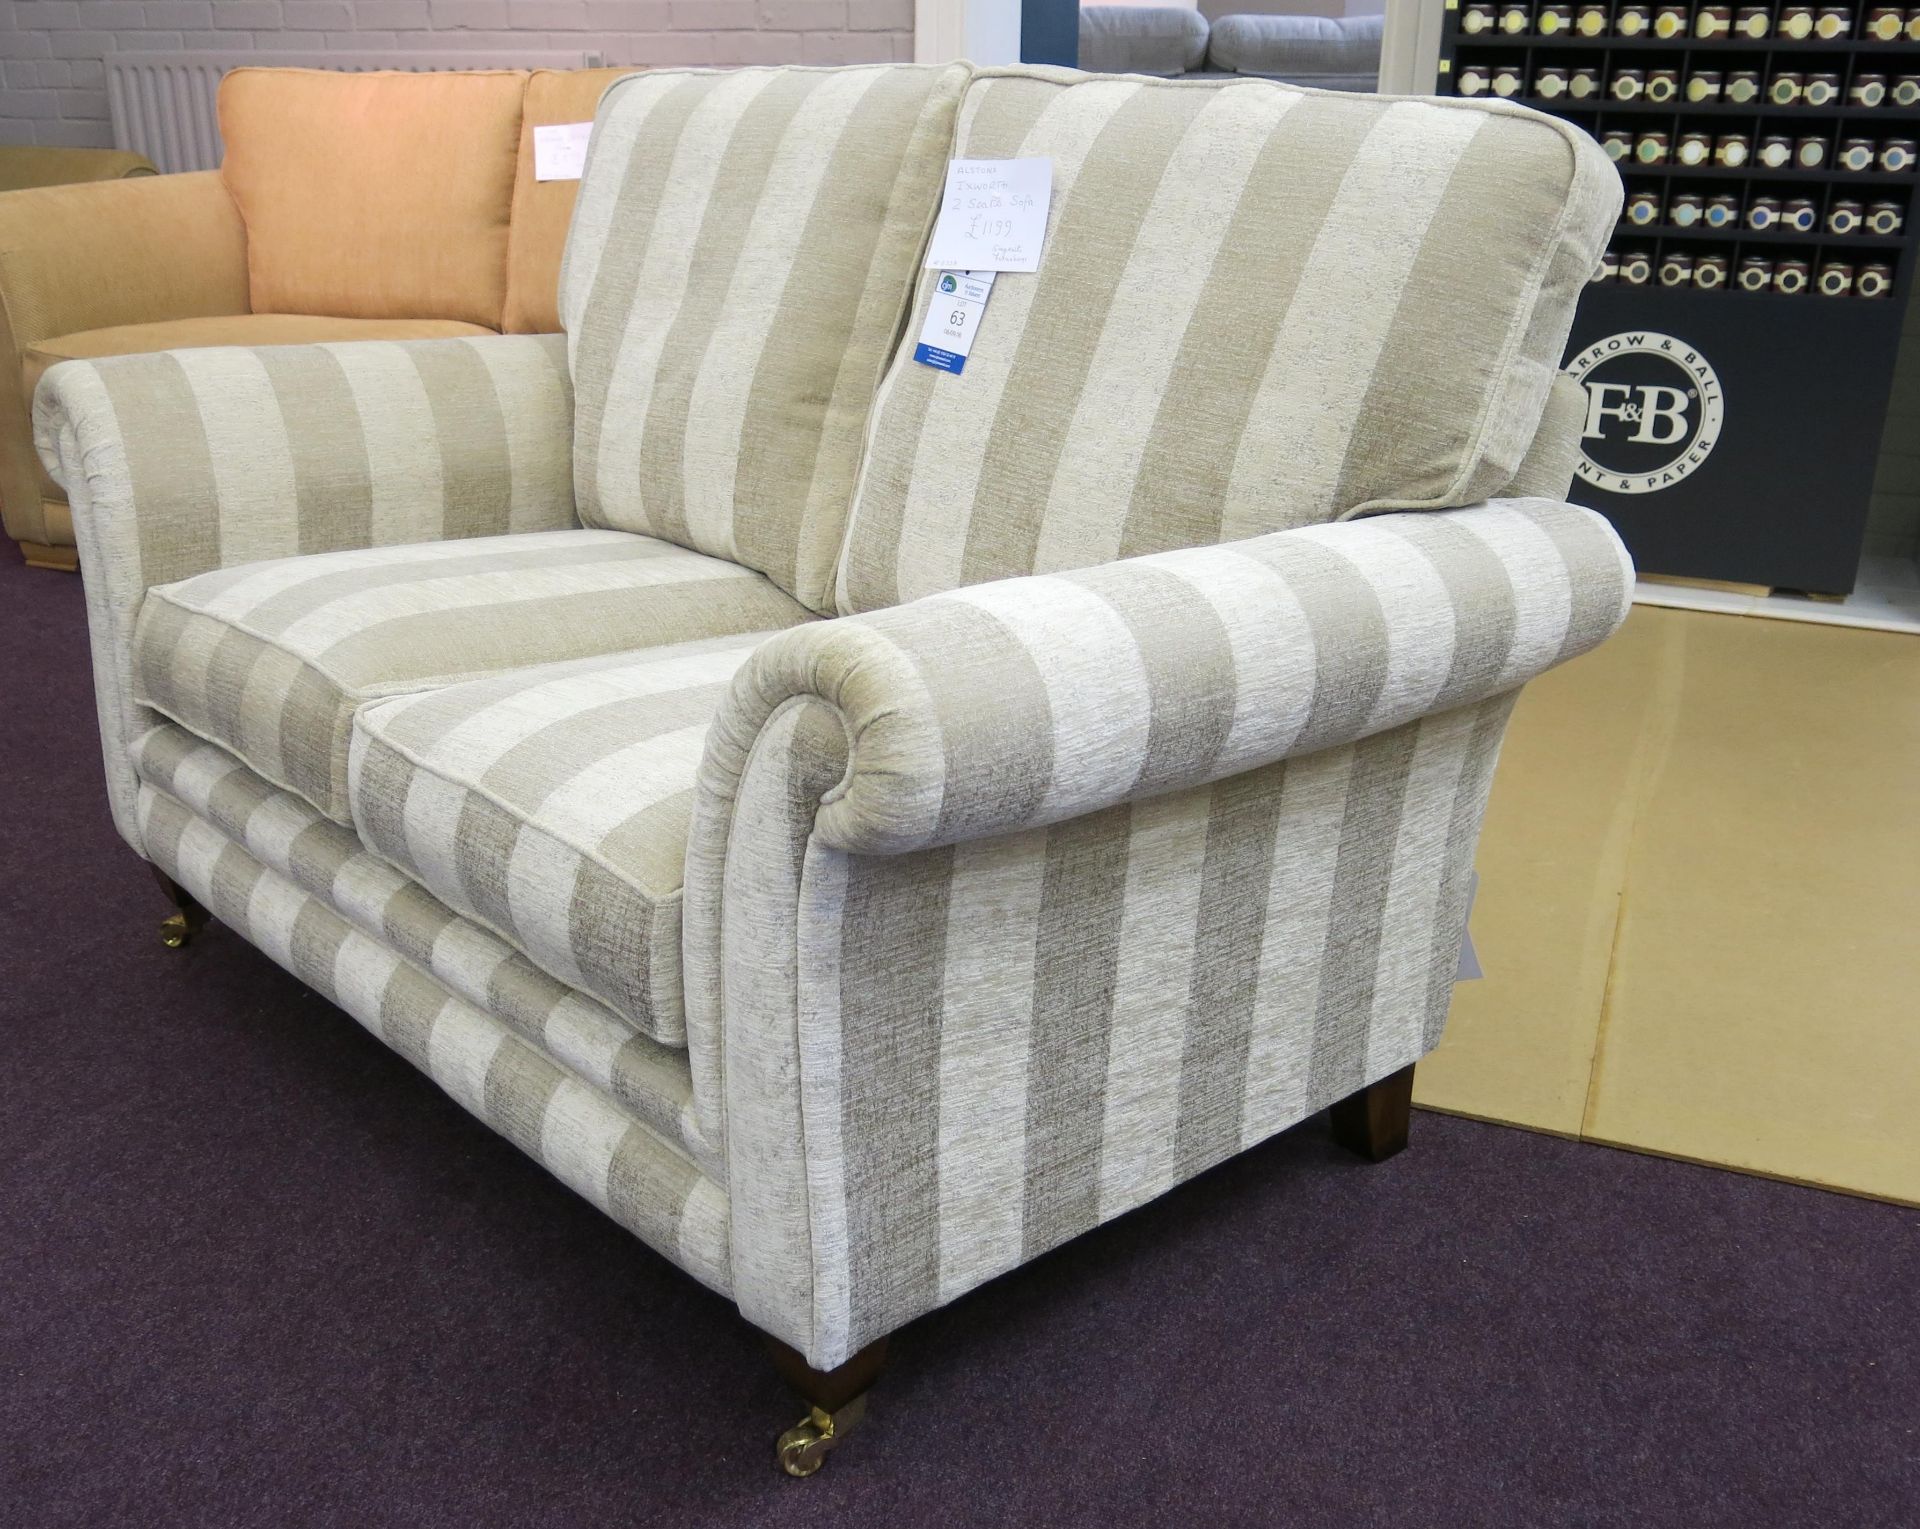 Alstons Ixworth two seat sofa with oyster stripe cover with polished brass castors on front feet. - Image 3 of 4